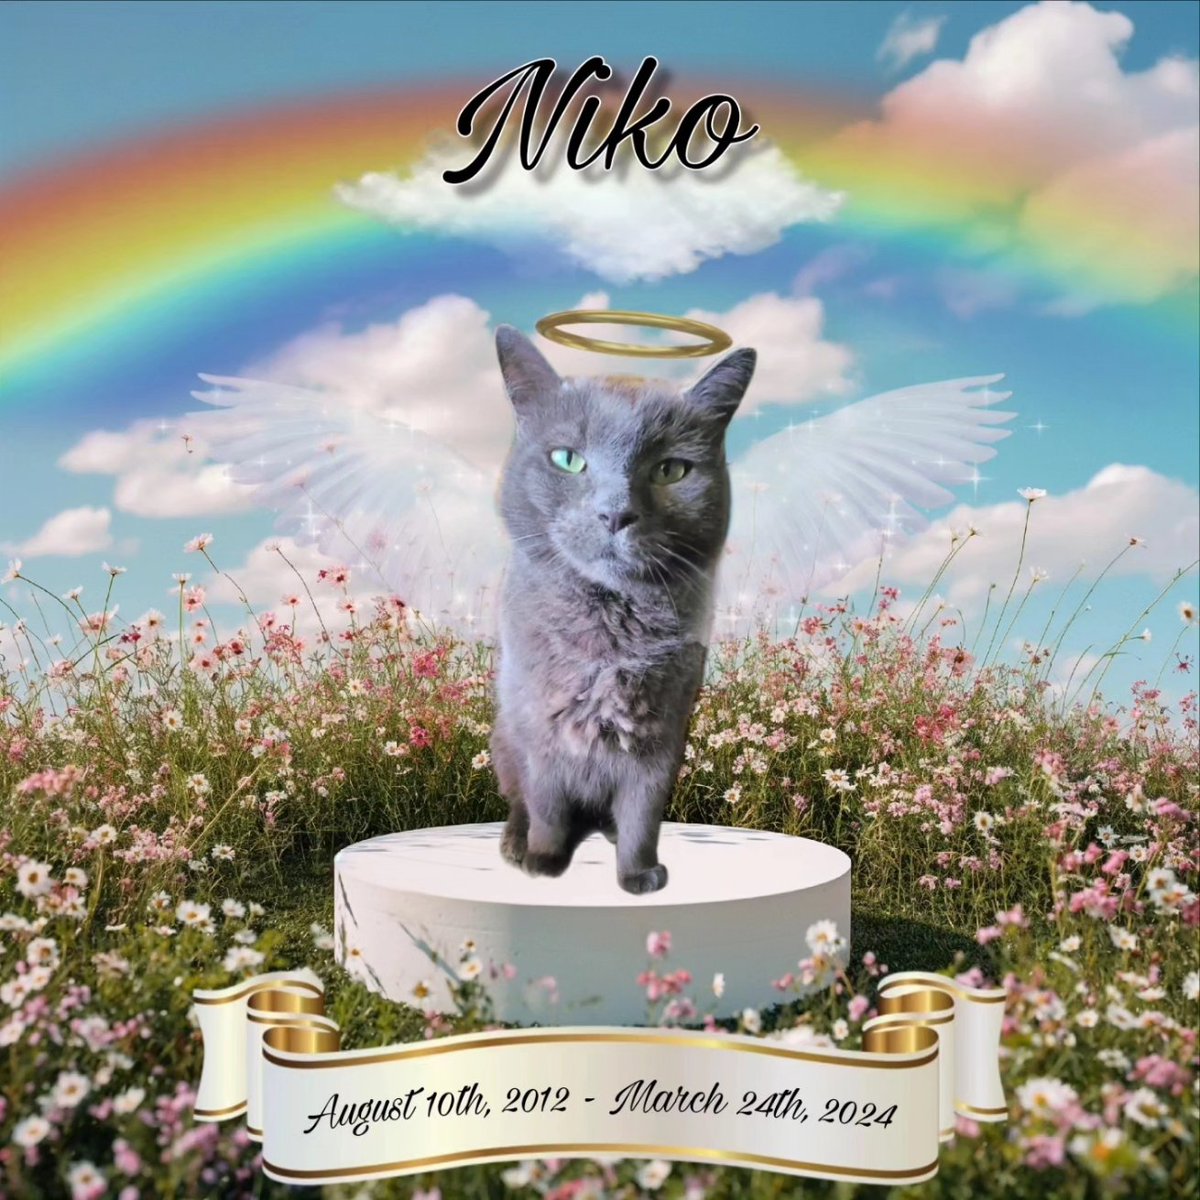 My sweet boy Niko passed away. I've been struggling to find the right words but wanted to share his story here. I will continue in the comments. He was truly one of a kind and I am so grateful for him. Fly high my little angel. Mommy will always love you. 🩵🌈✨️